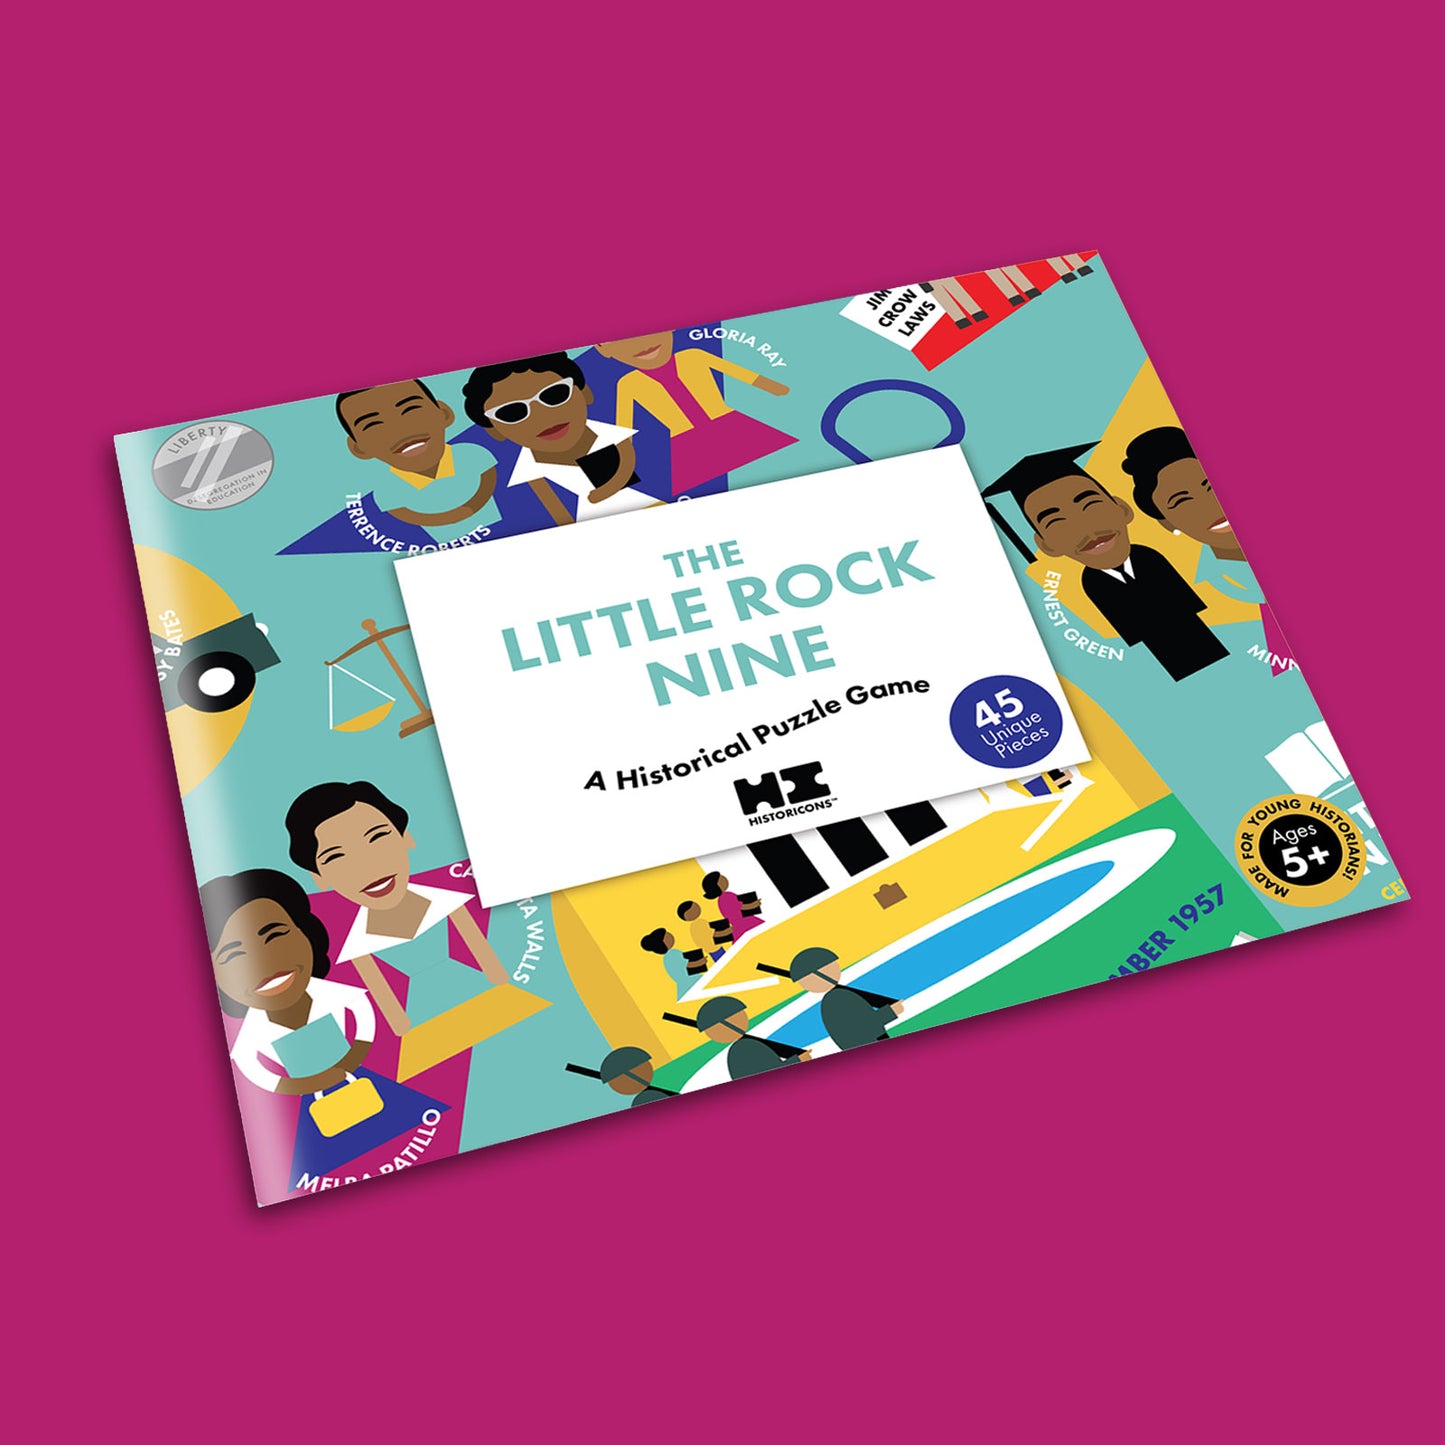 Pictured is the Historicons Little Rock Nine kid's puzzle game in its packaging. The puzzle comes flat-packed in a glossy storage envelope for compact storage. Pictured is the front of the envelope, which is teal and shows a zoomed in picture of some of the histoic icons and vignettes featured on the puzzle, along with text that says: The Little Rock Nine, A Historical Puzzle Game. 45 Unique Pieces. Made for young historians ages 5+.